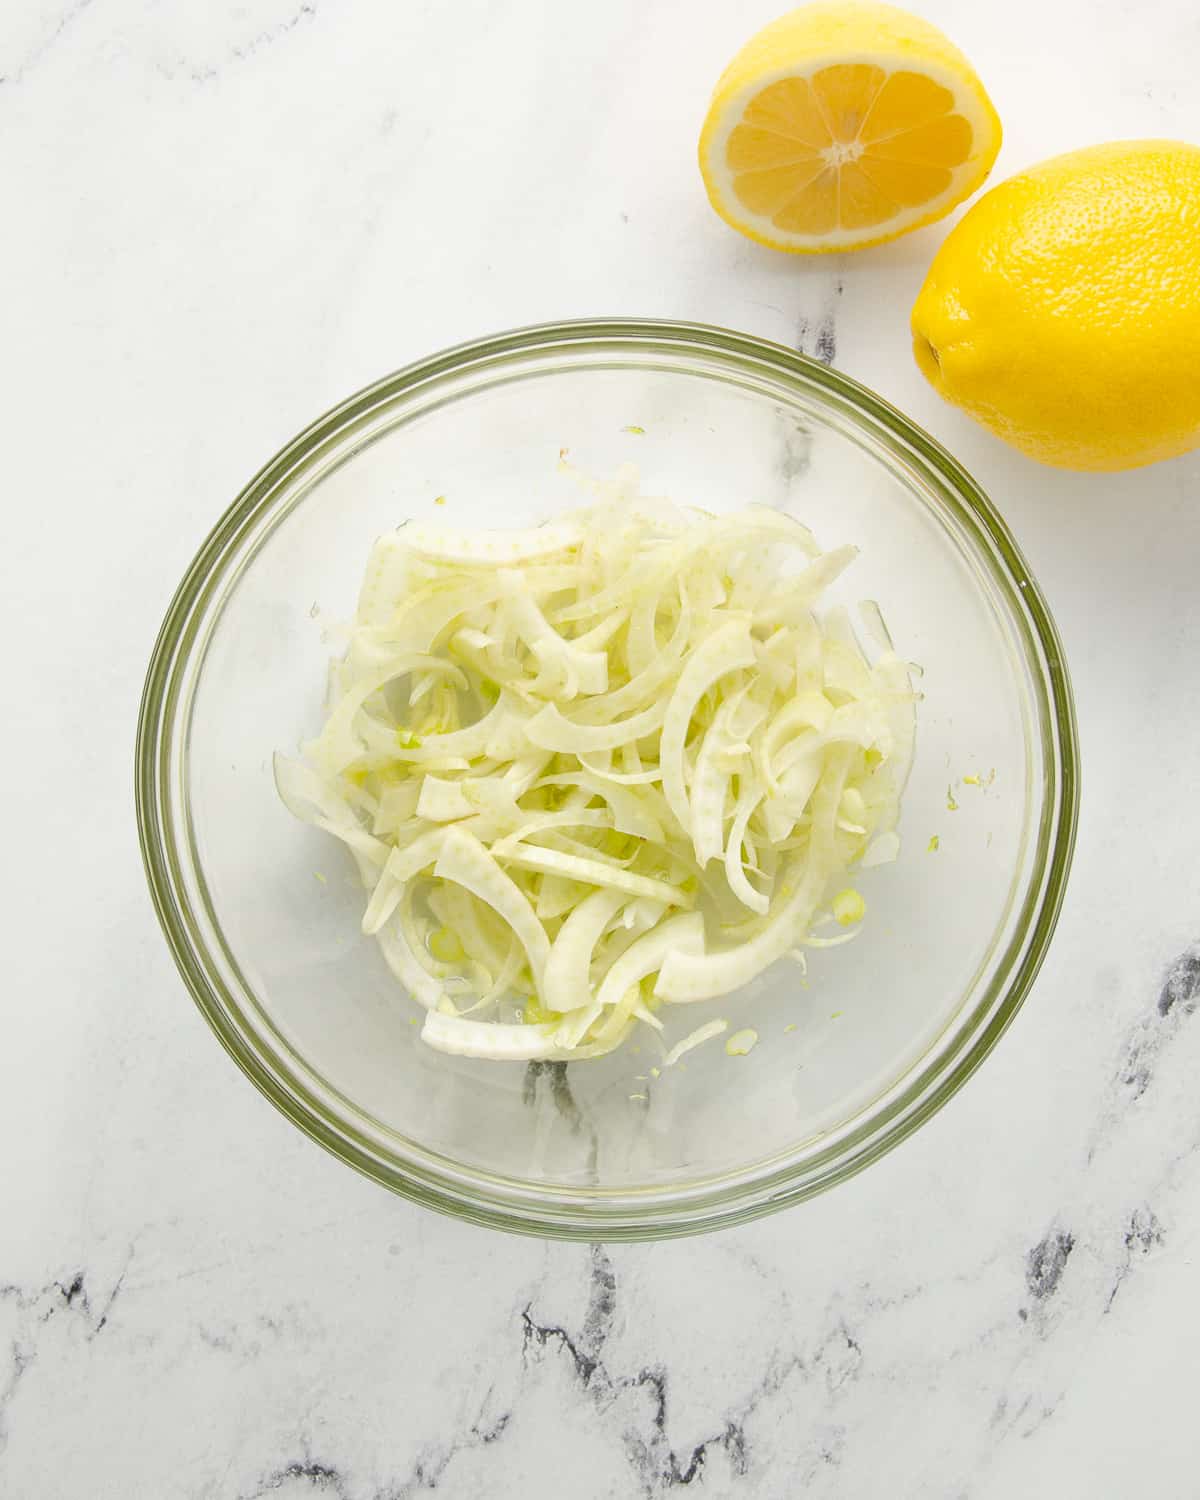 A glass bowl with shaved fennel next to a lemon and a lemon wedge.